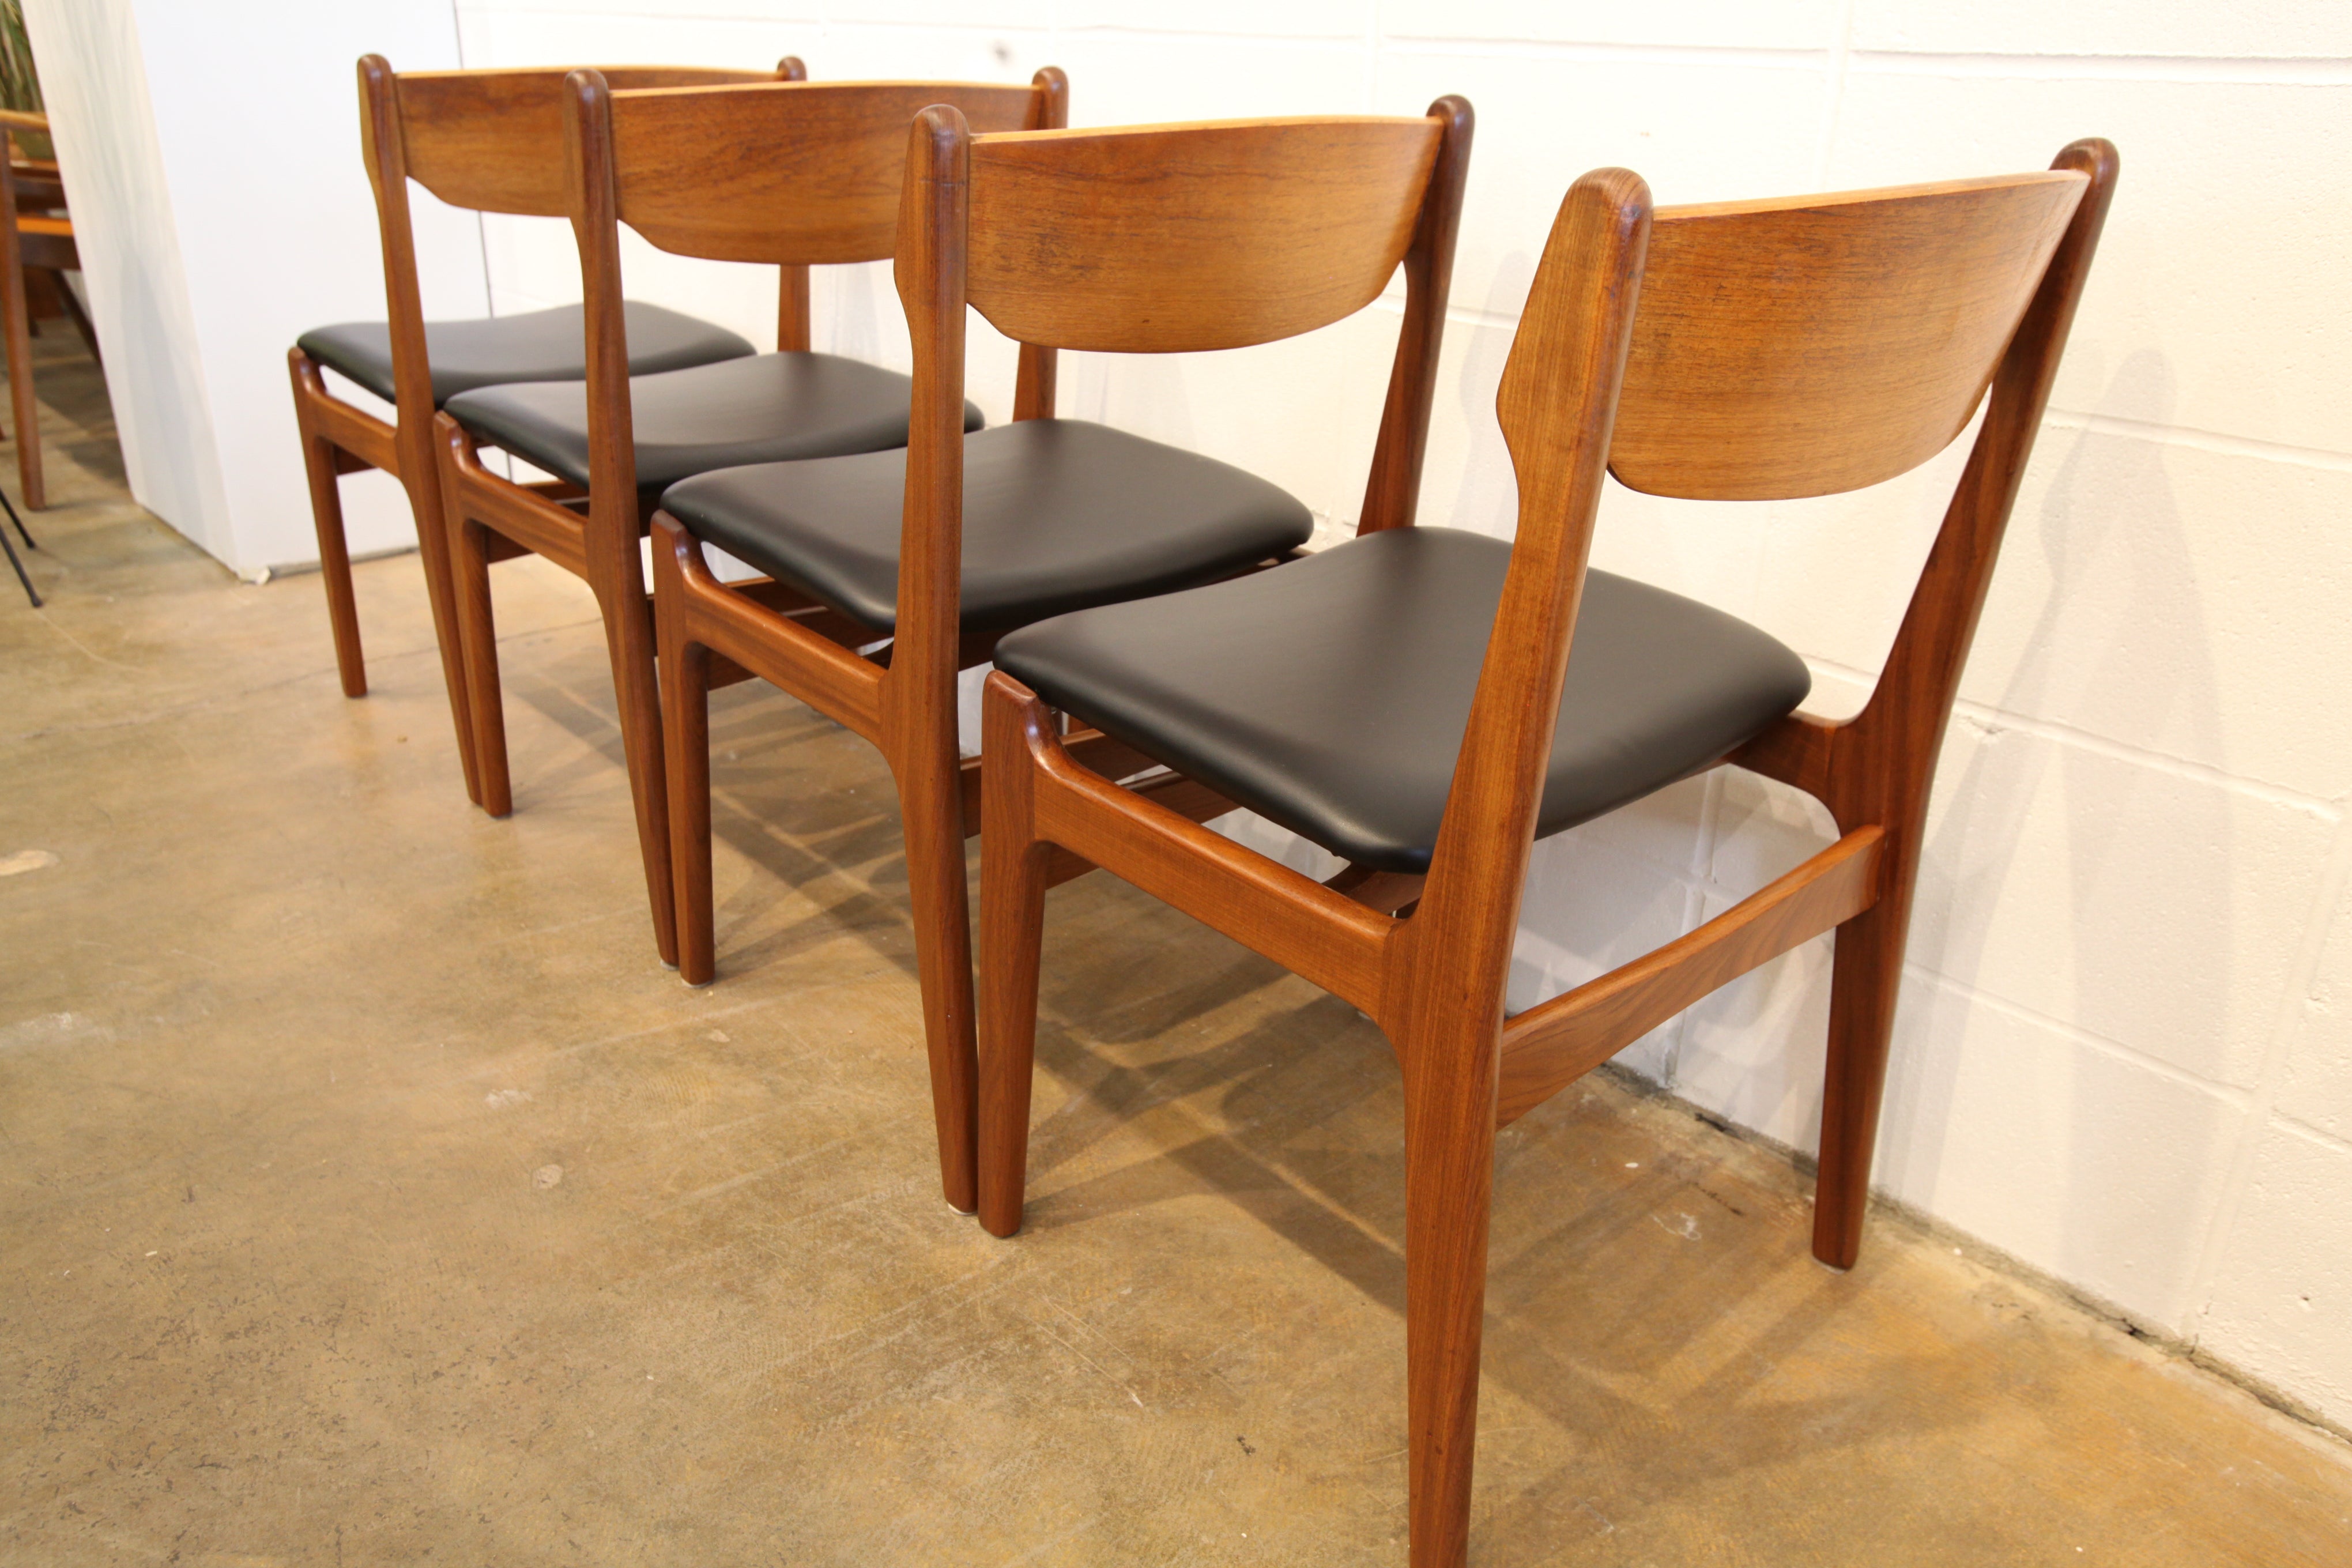 Set of 4 Vintage Eric Buch Teak Dining Chairs (floating seat)